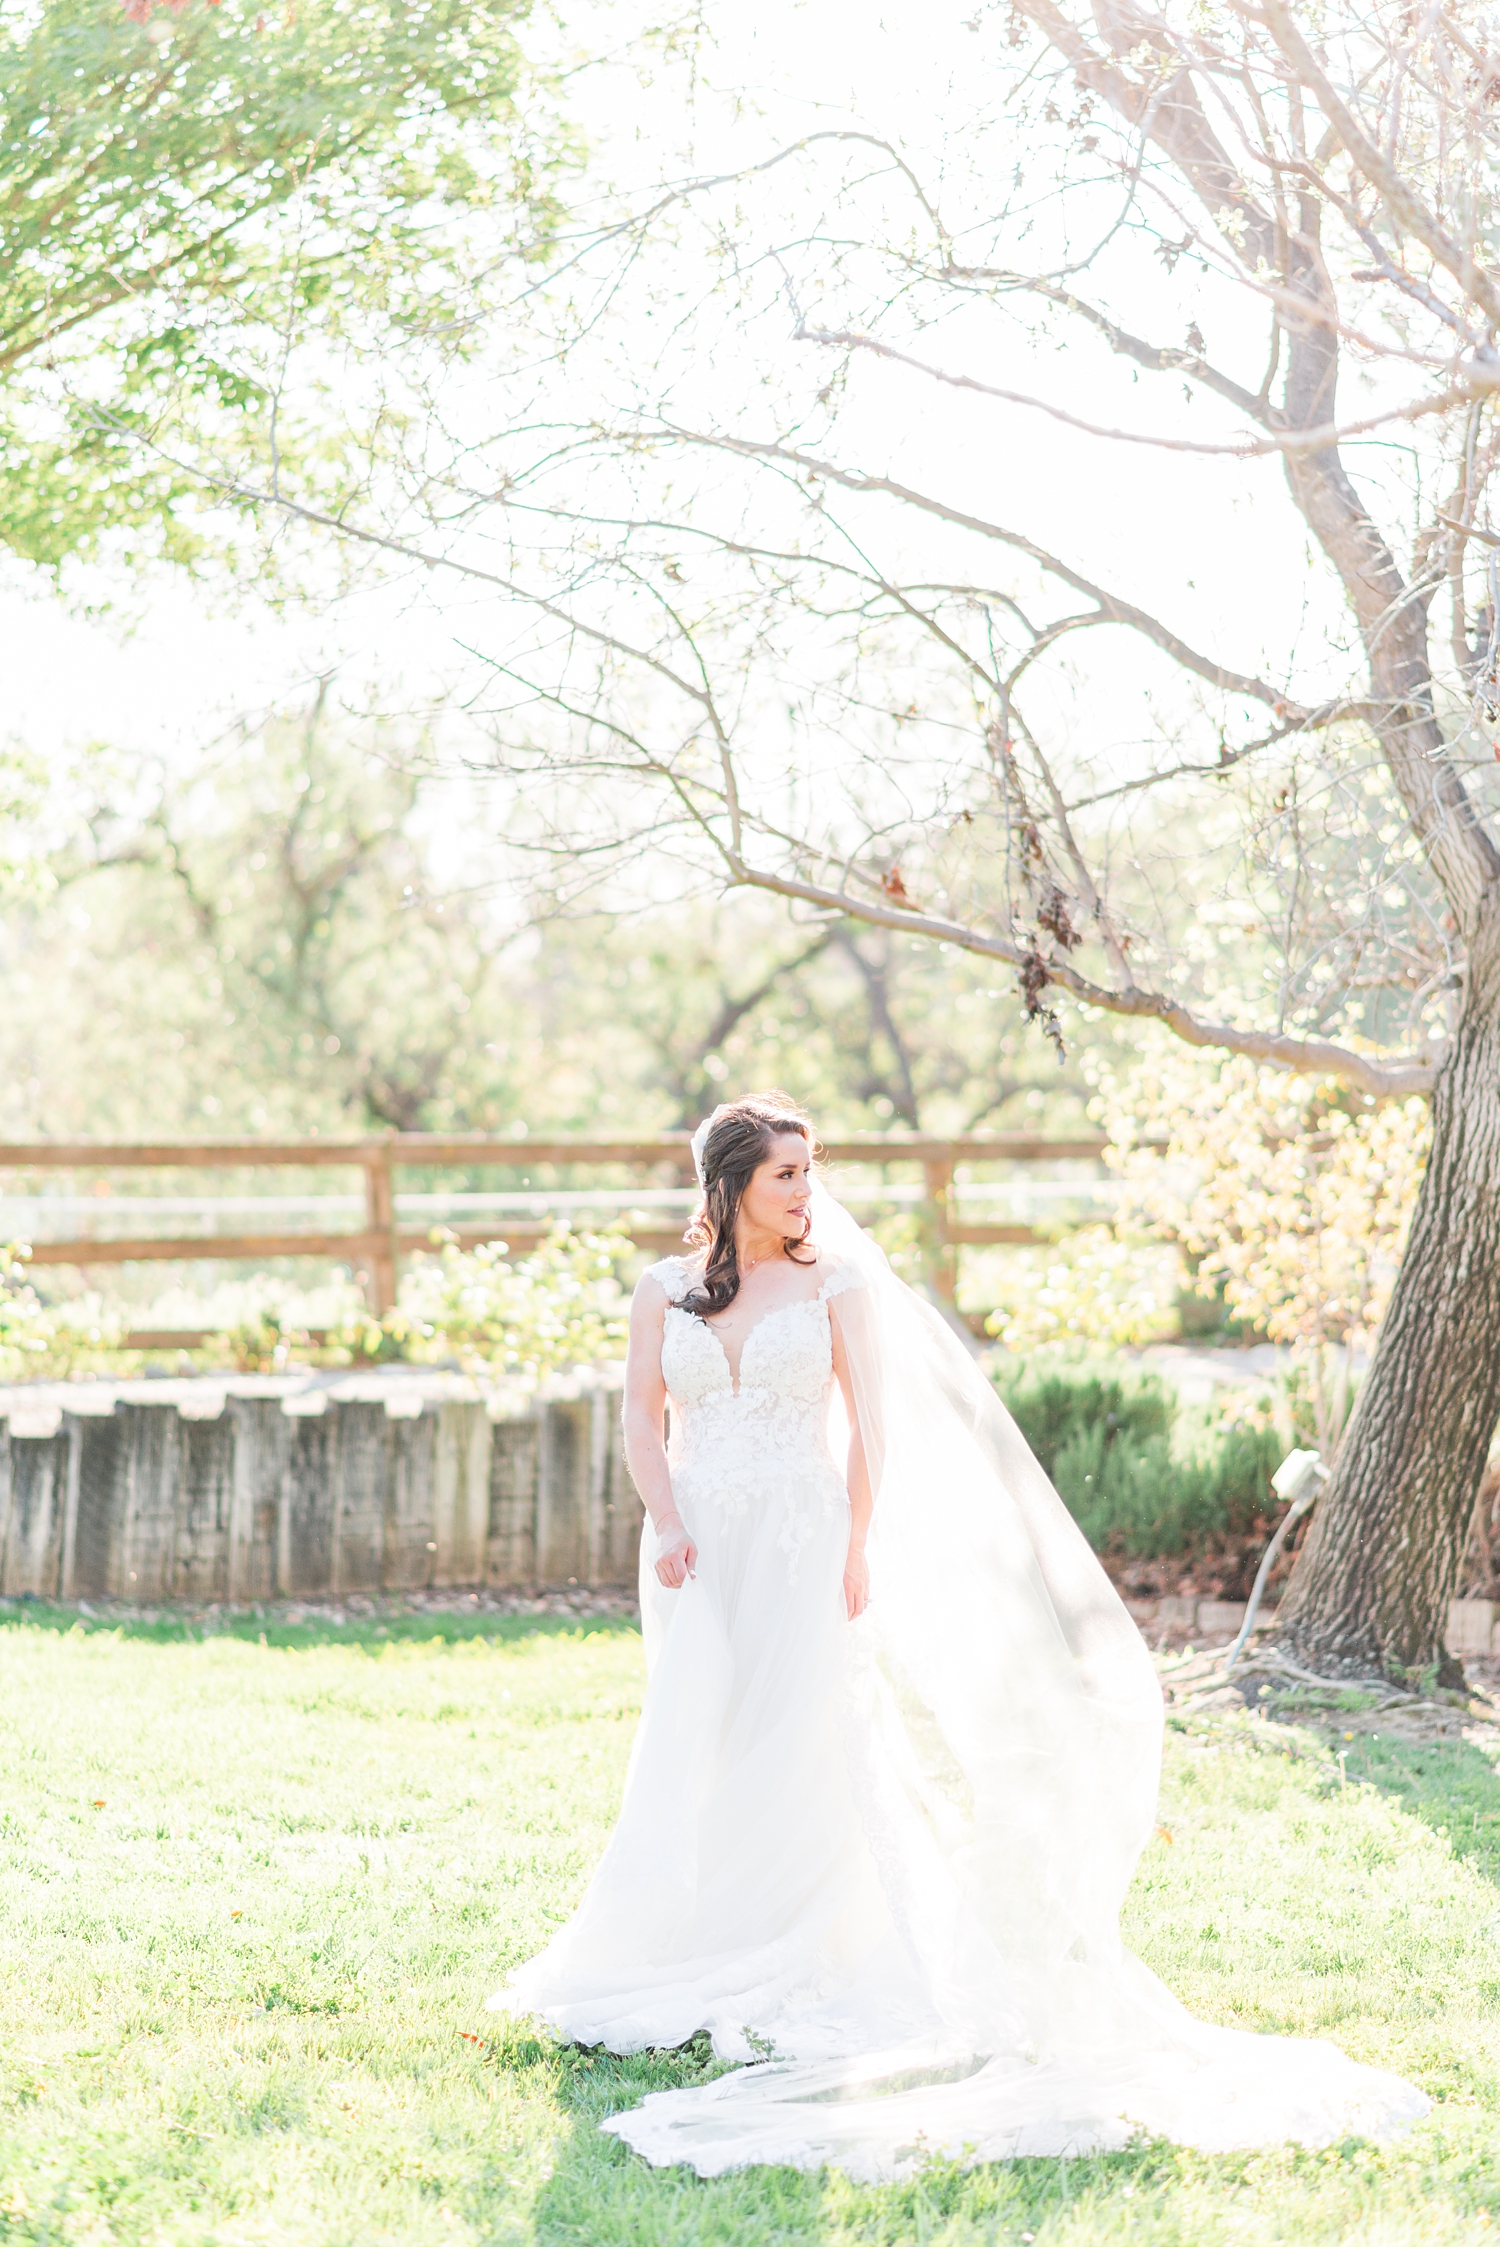 Bridal Session in a winery in temecula from a Temecula Wedding Photographer_0005.jpg